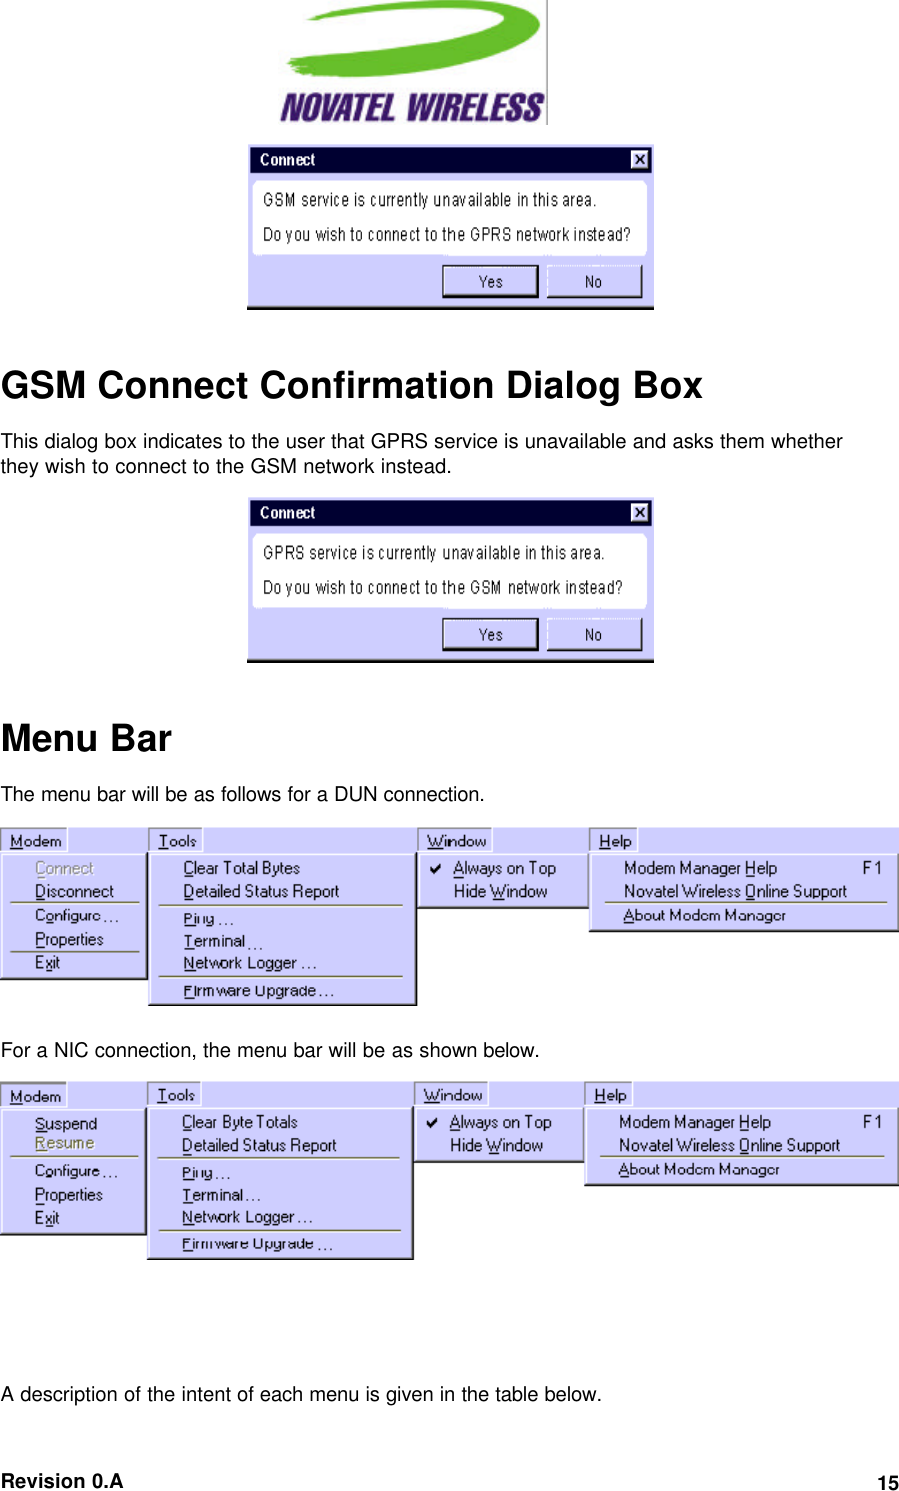  Revision 0.A 15    GSM Connect Confirmation Dialog Box This dialog box indicates to the user that GPRS service is unavailable and asks them whether they wish to connect to the GSM network instead.    Menu Bar The menu bar will be as follows for a DUN connection.   For a NIC connection, the menu bar will be as shown below.     A description of the intent of each menu is given in the table below. 